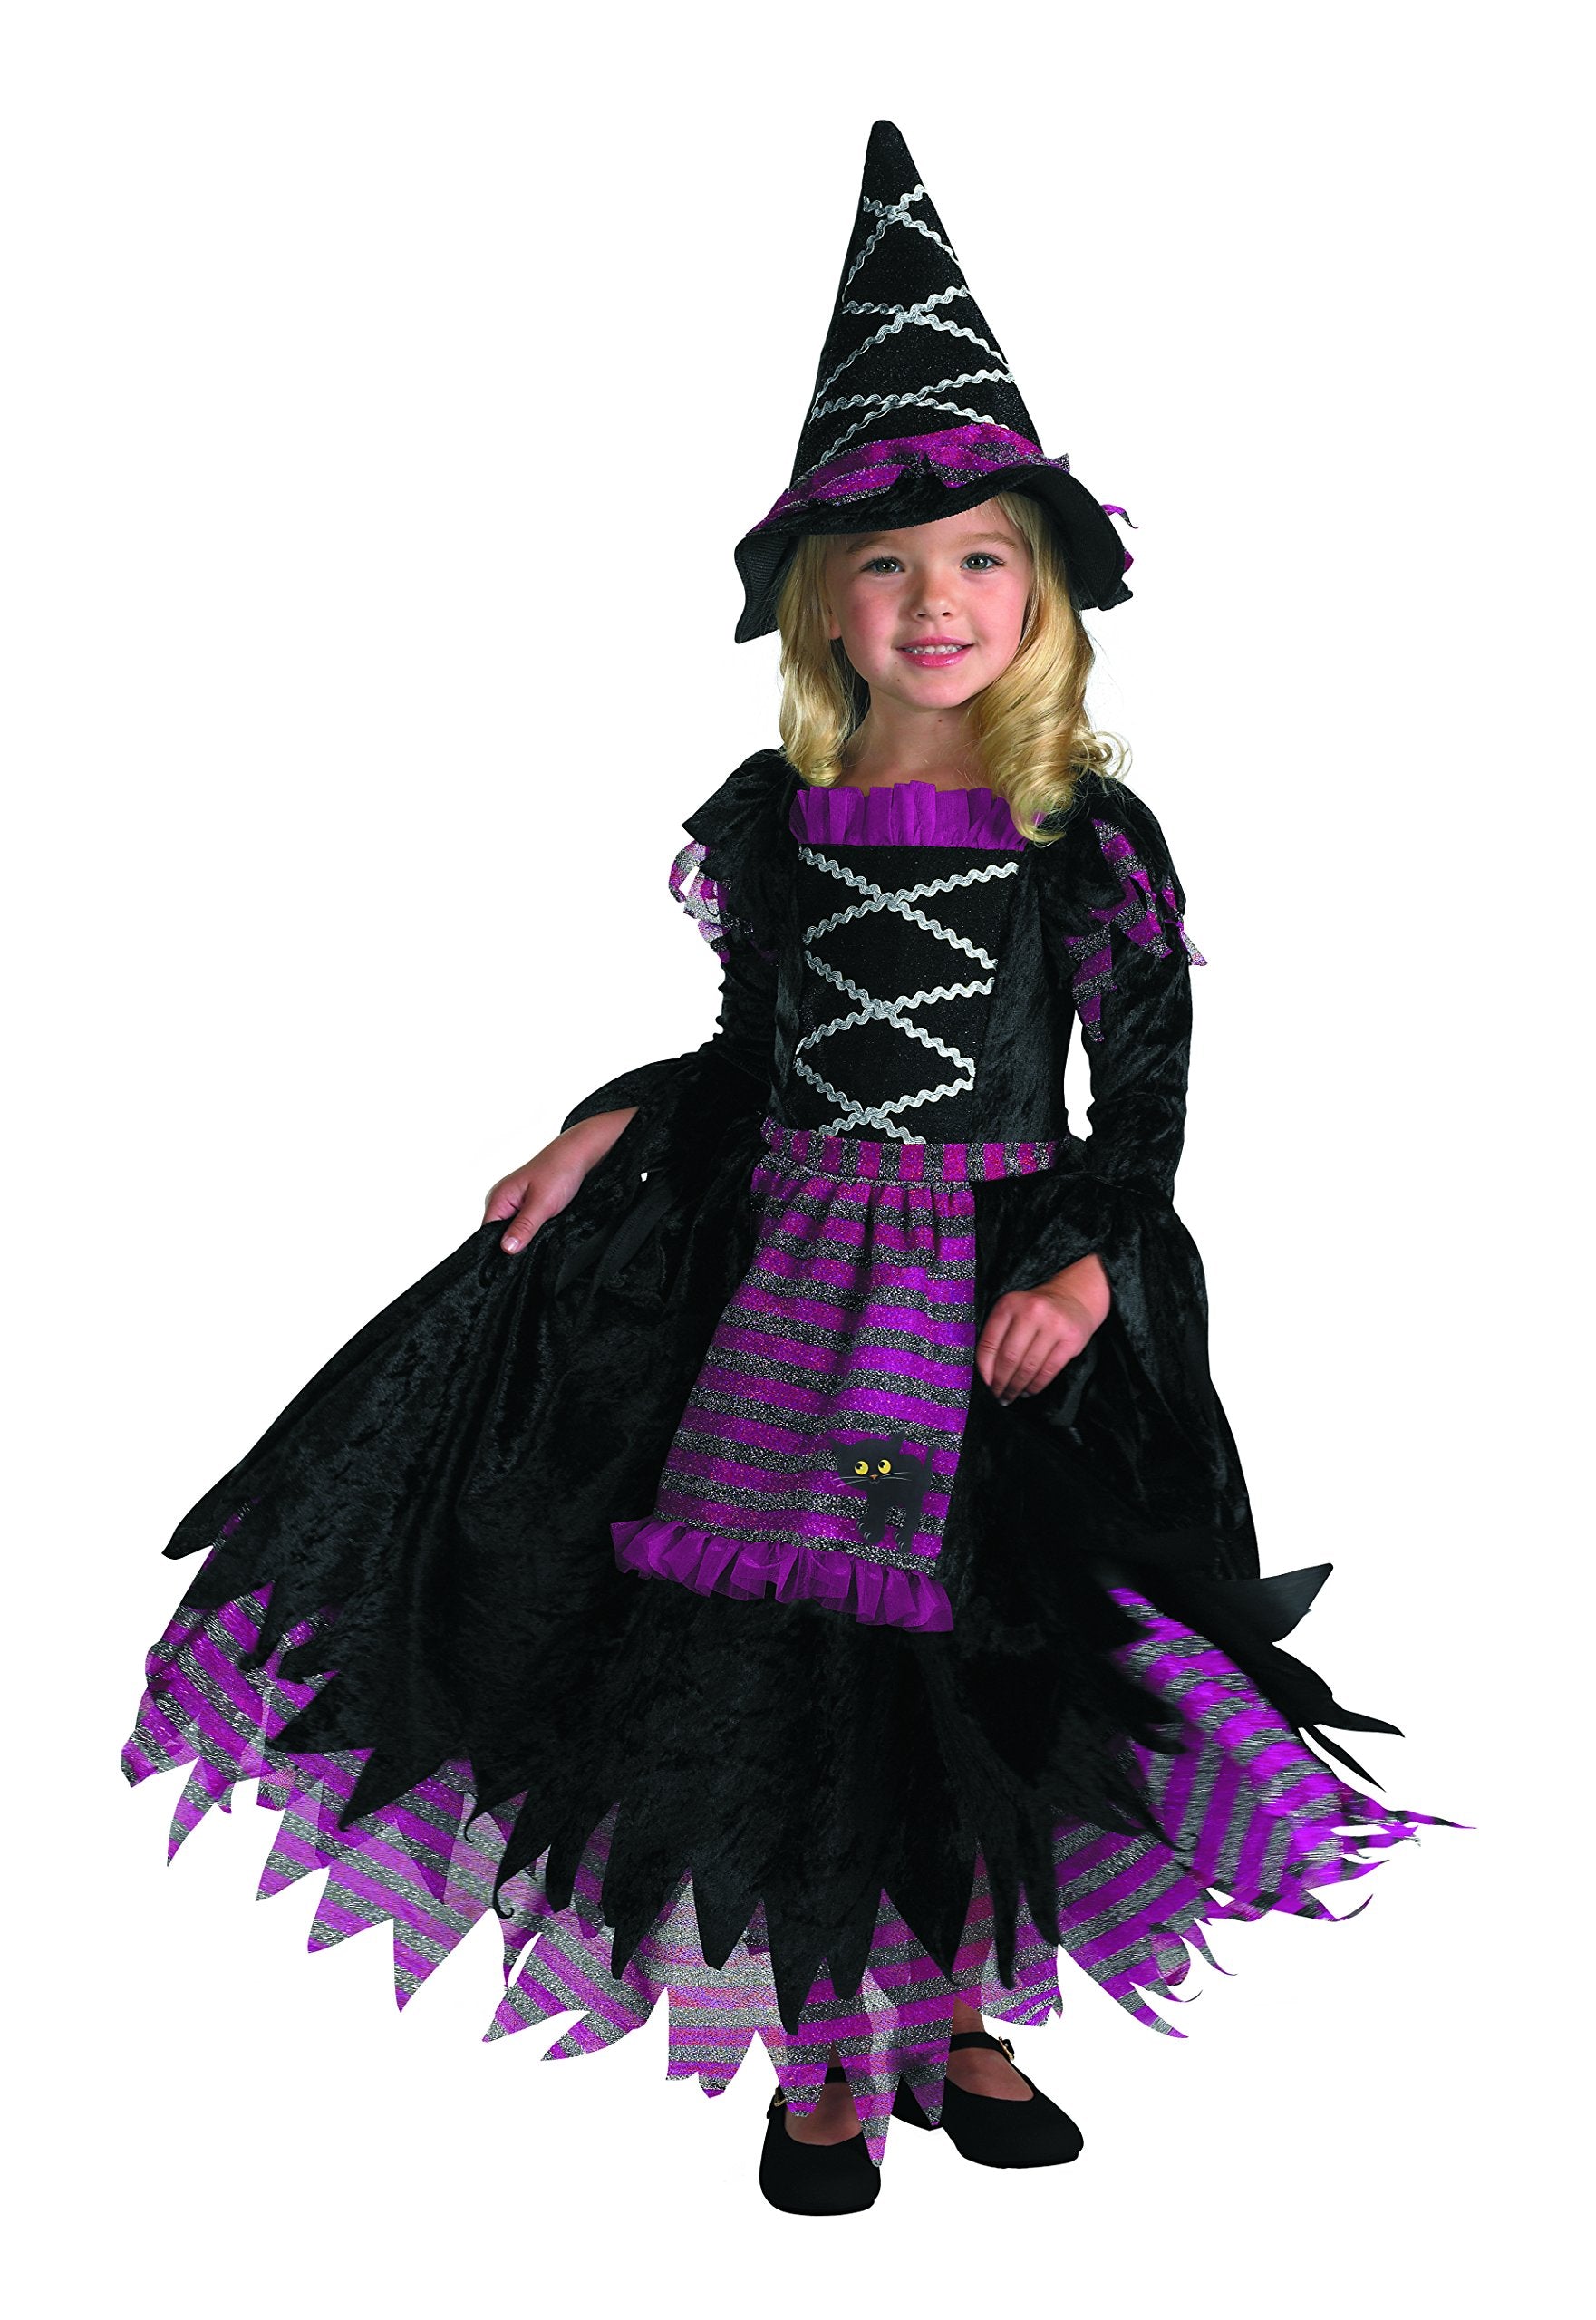 Disguise Fairytale Witch Costume